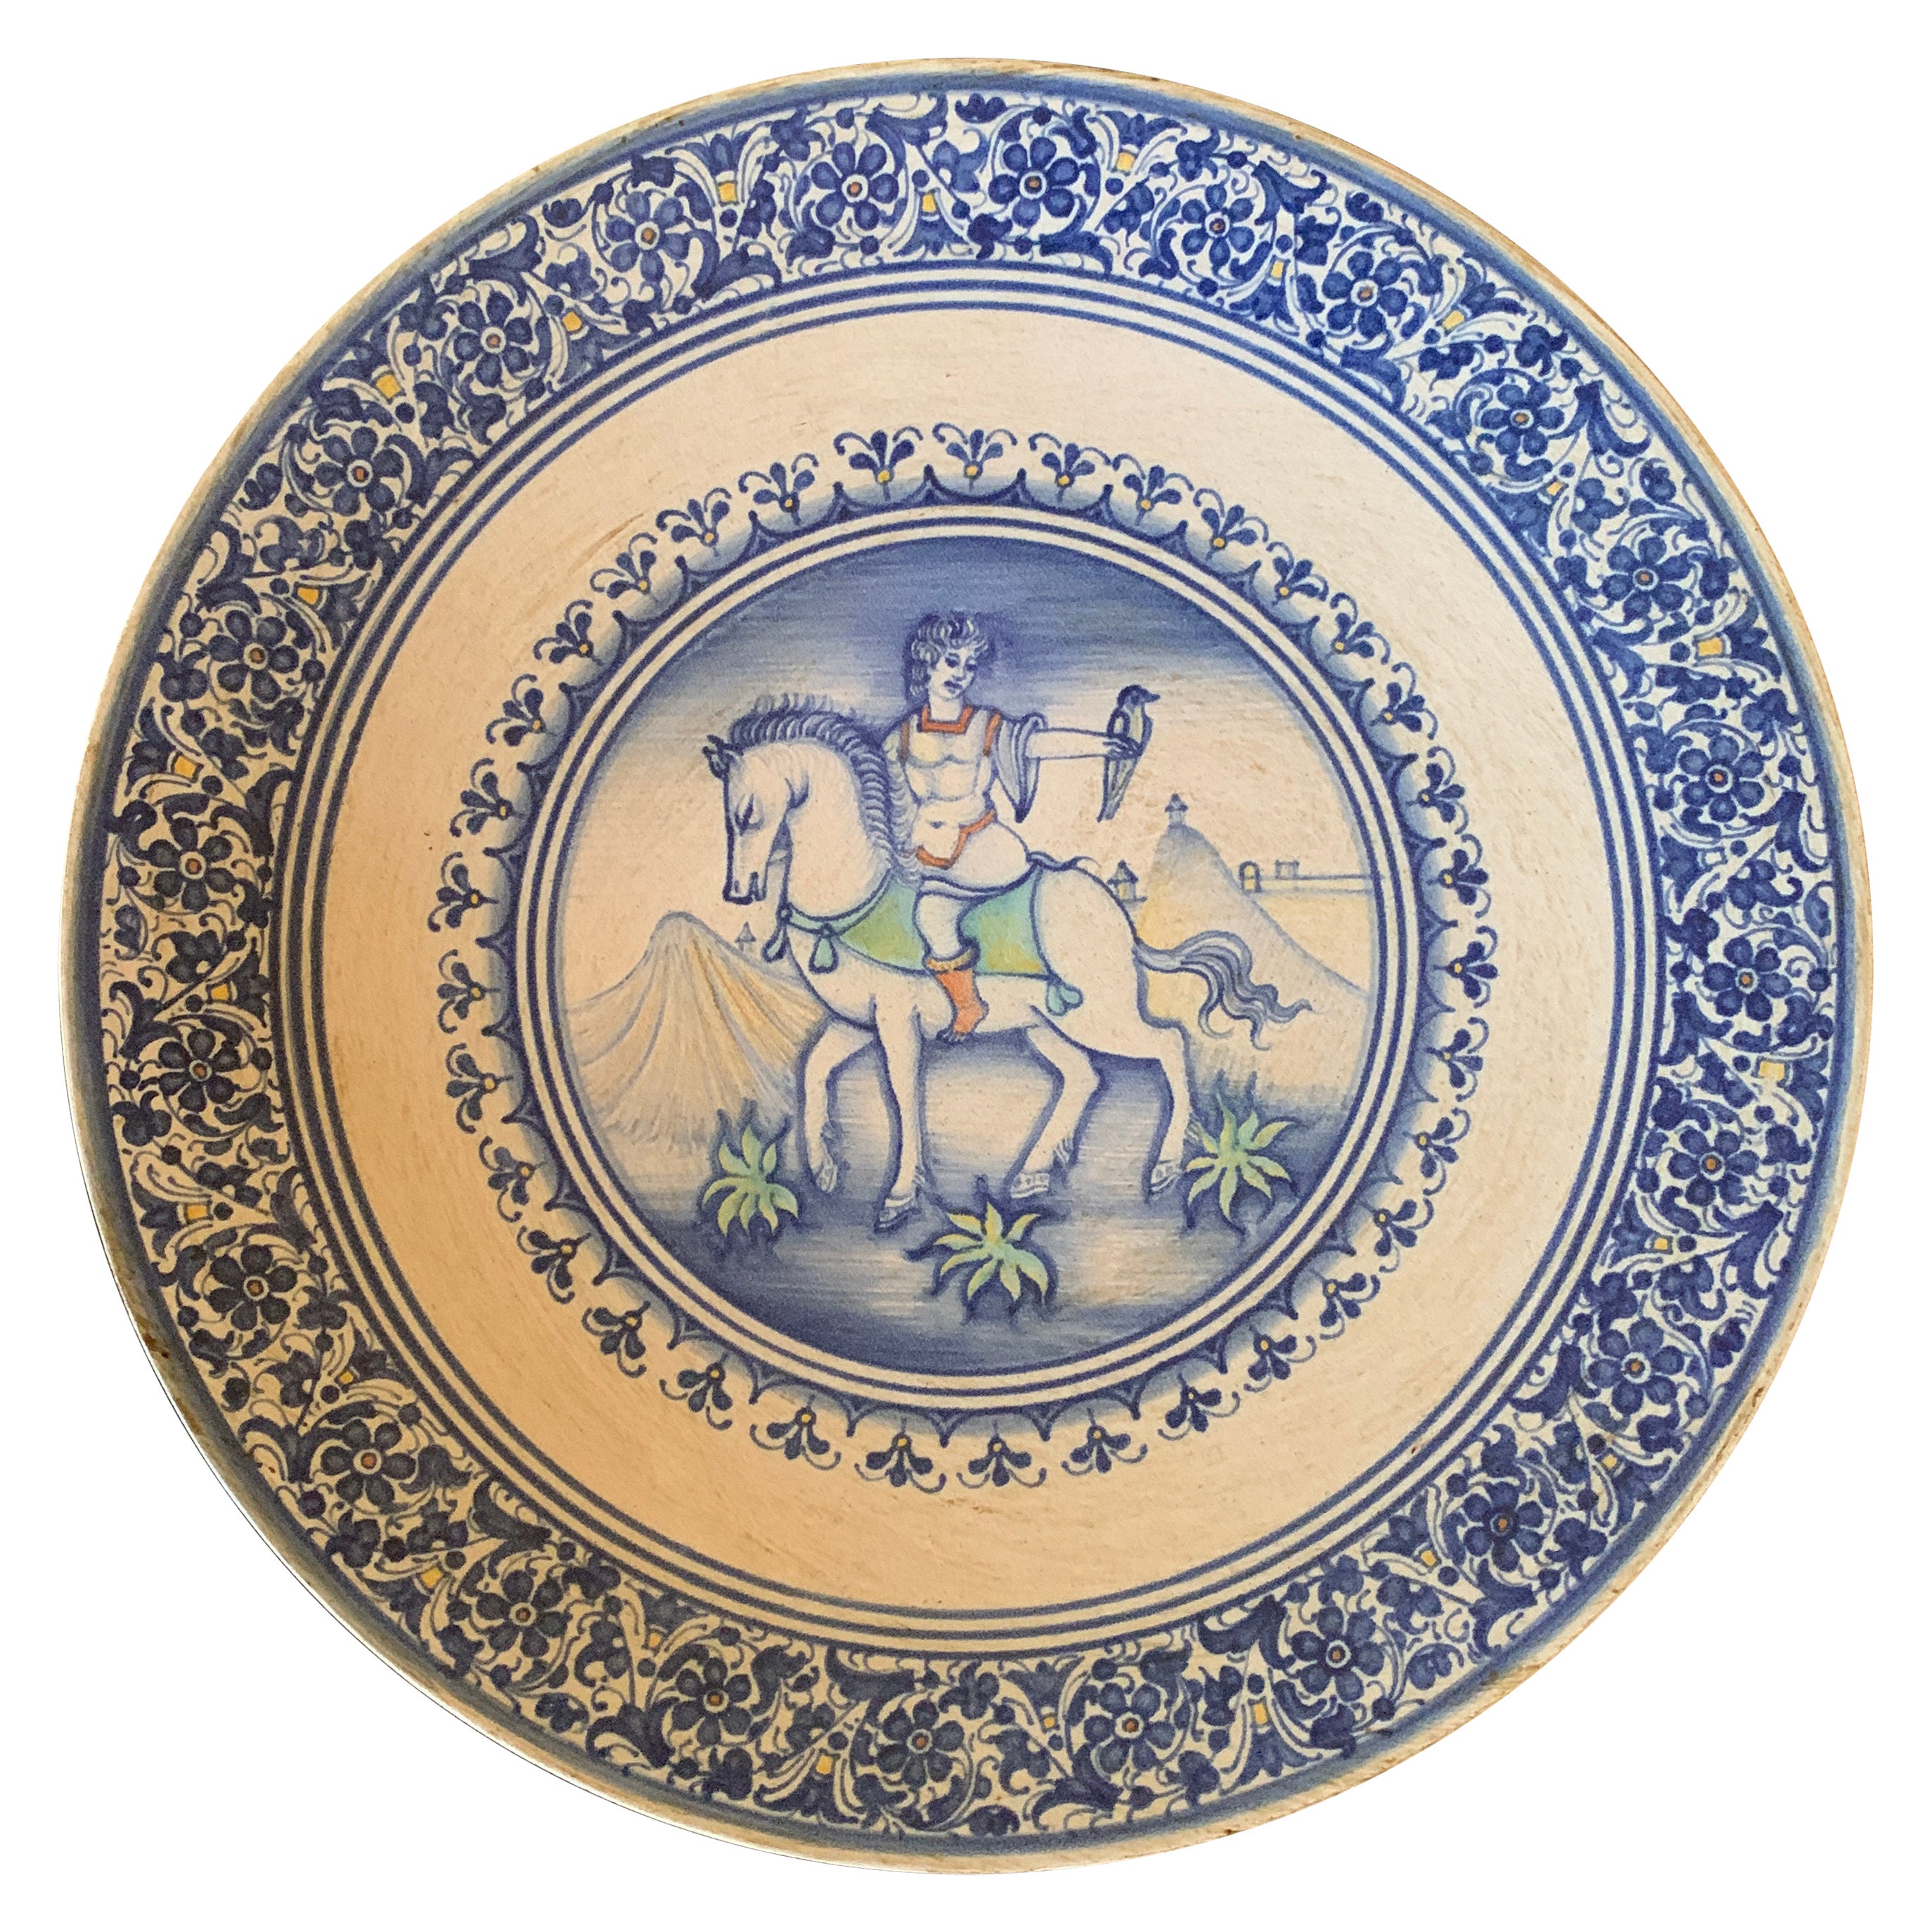 Italian Provincial Deruta Hand Painted Faience Allegorical Pottery Wall Plate